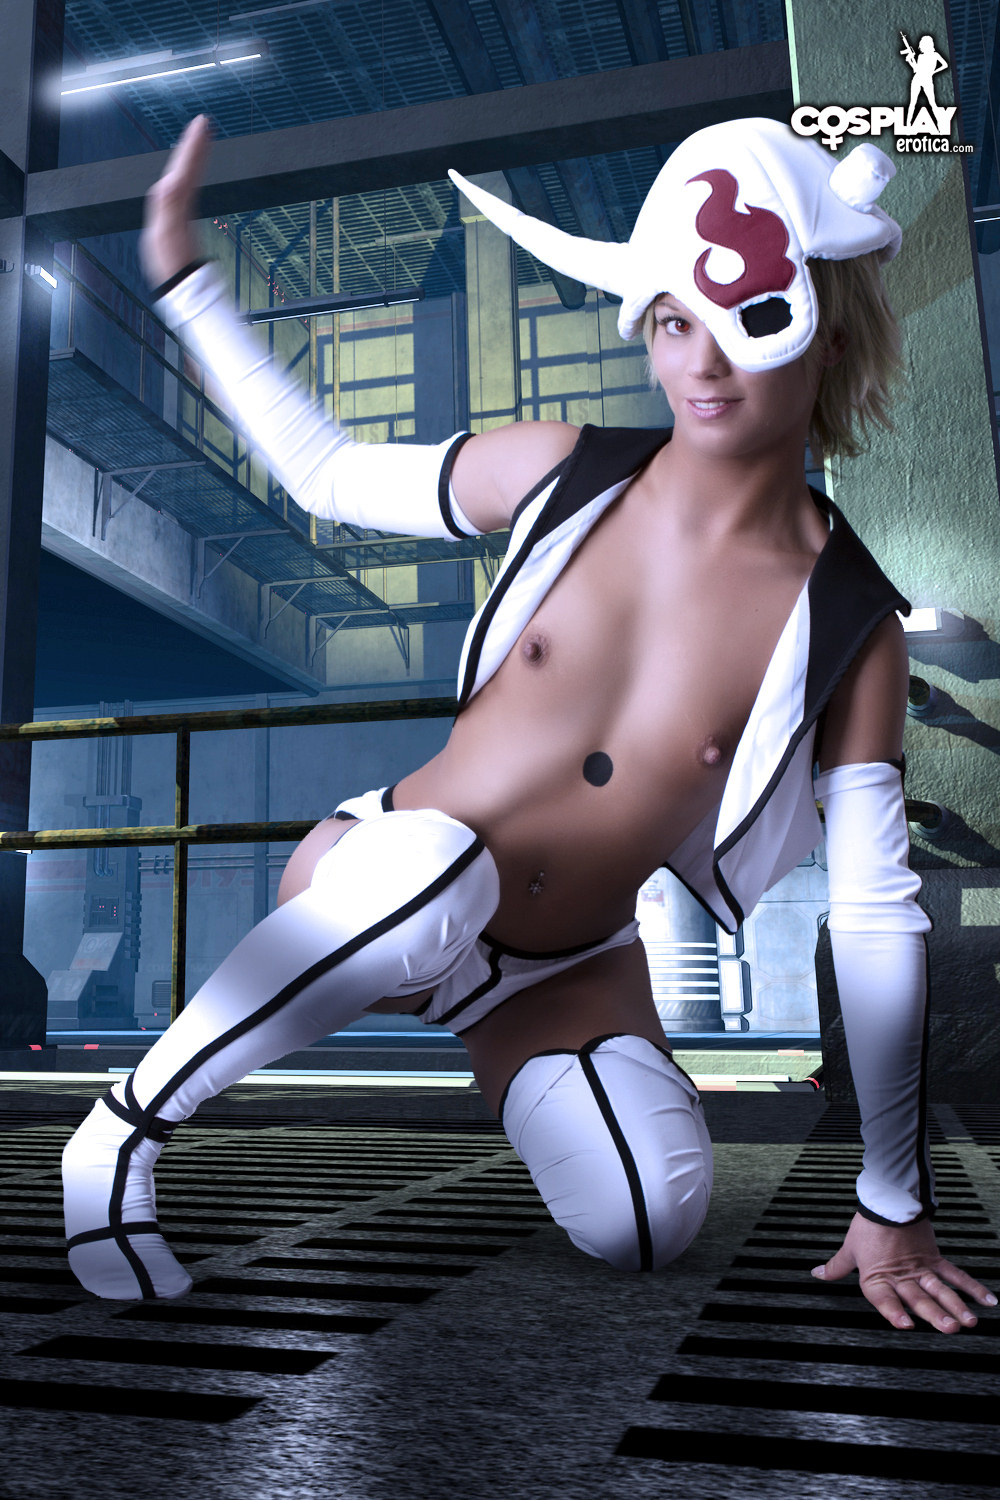 Melane - The Cutest Arrancar shows free gallery picture 09-09